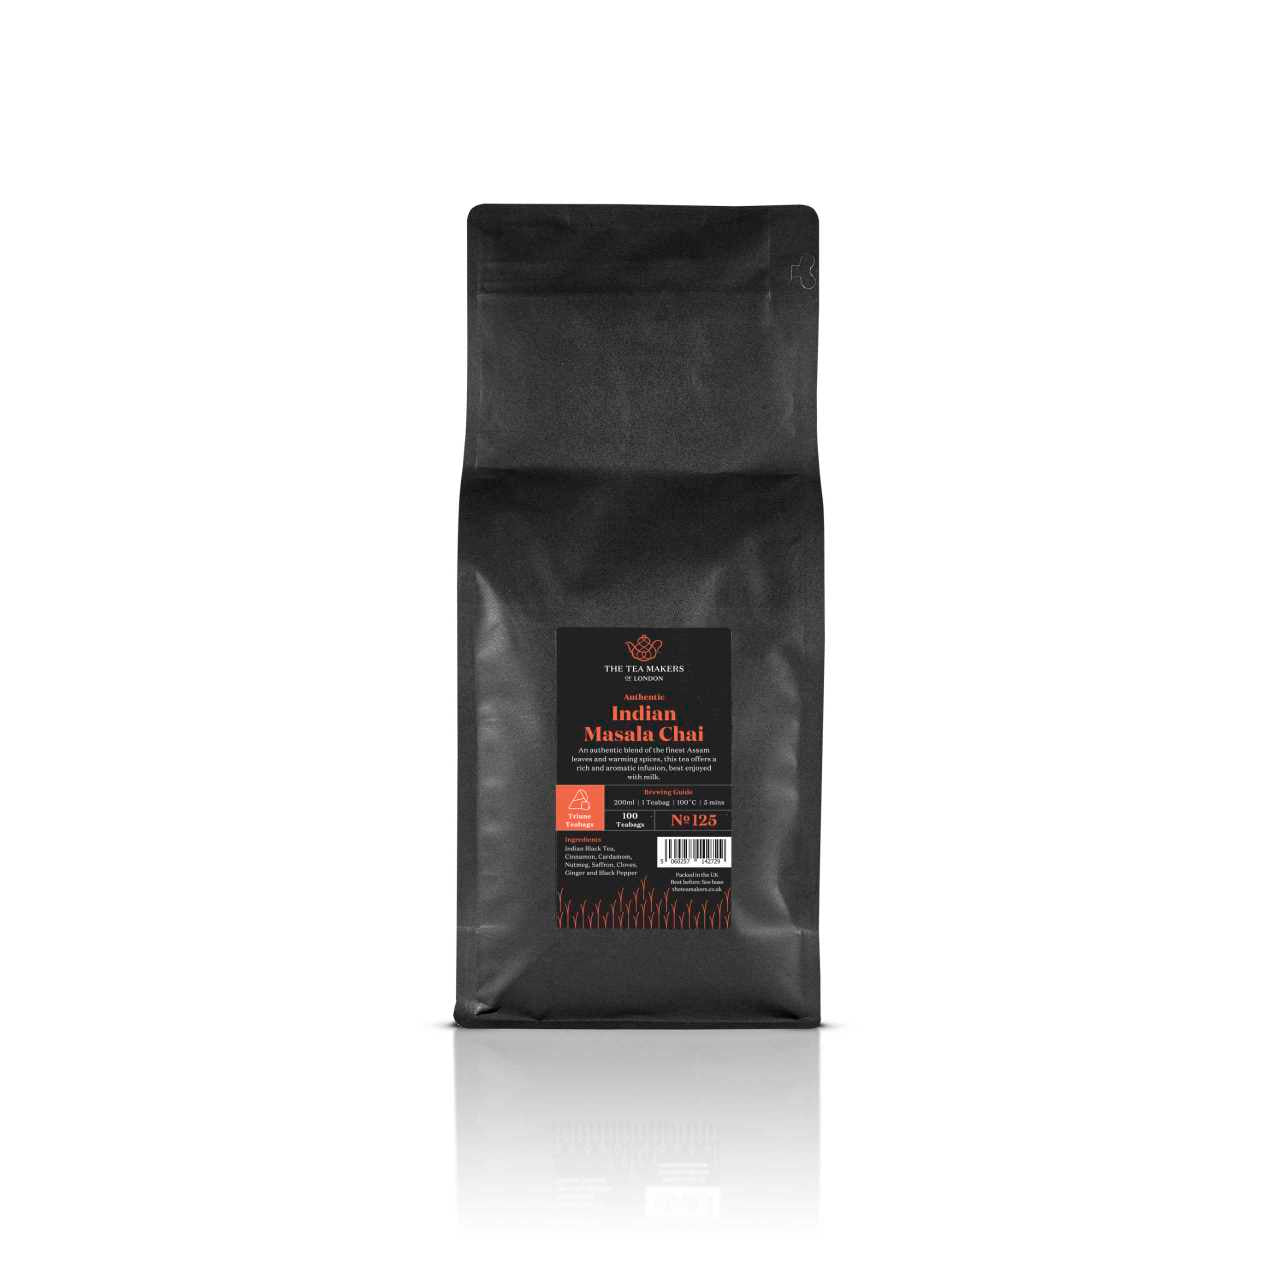 Authentic Masala Chai 250 teabag pack